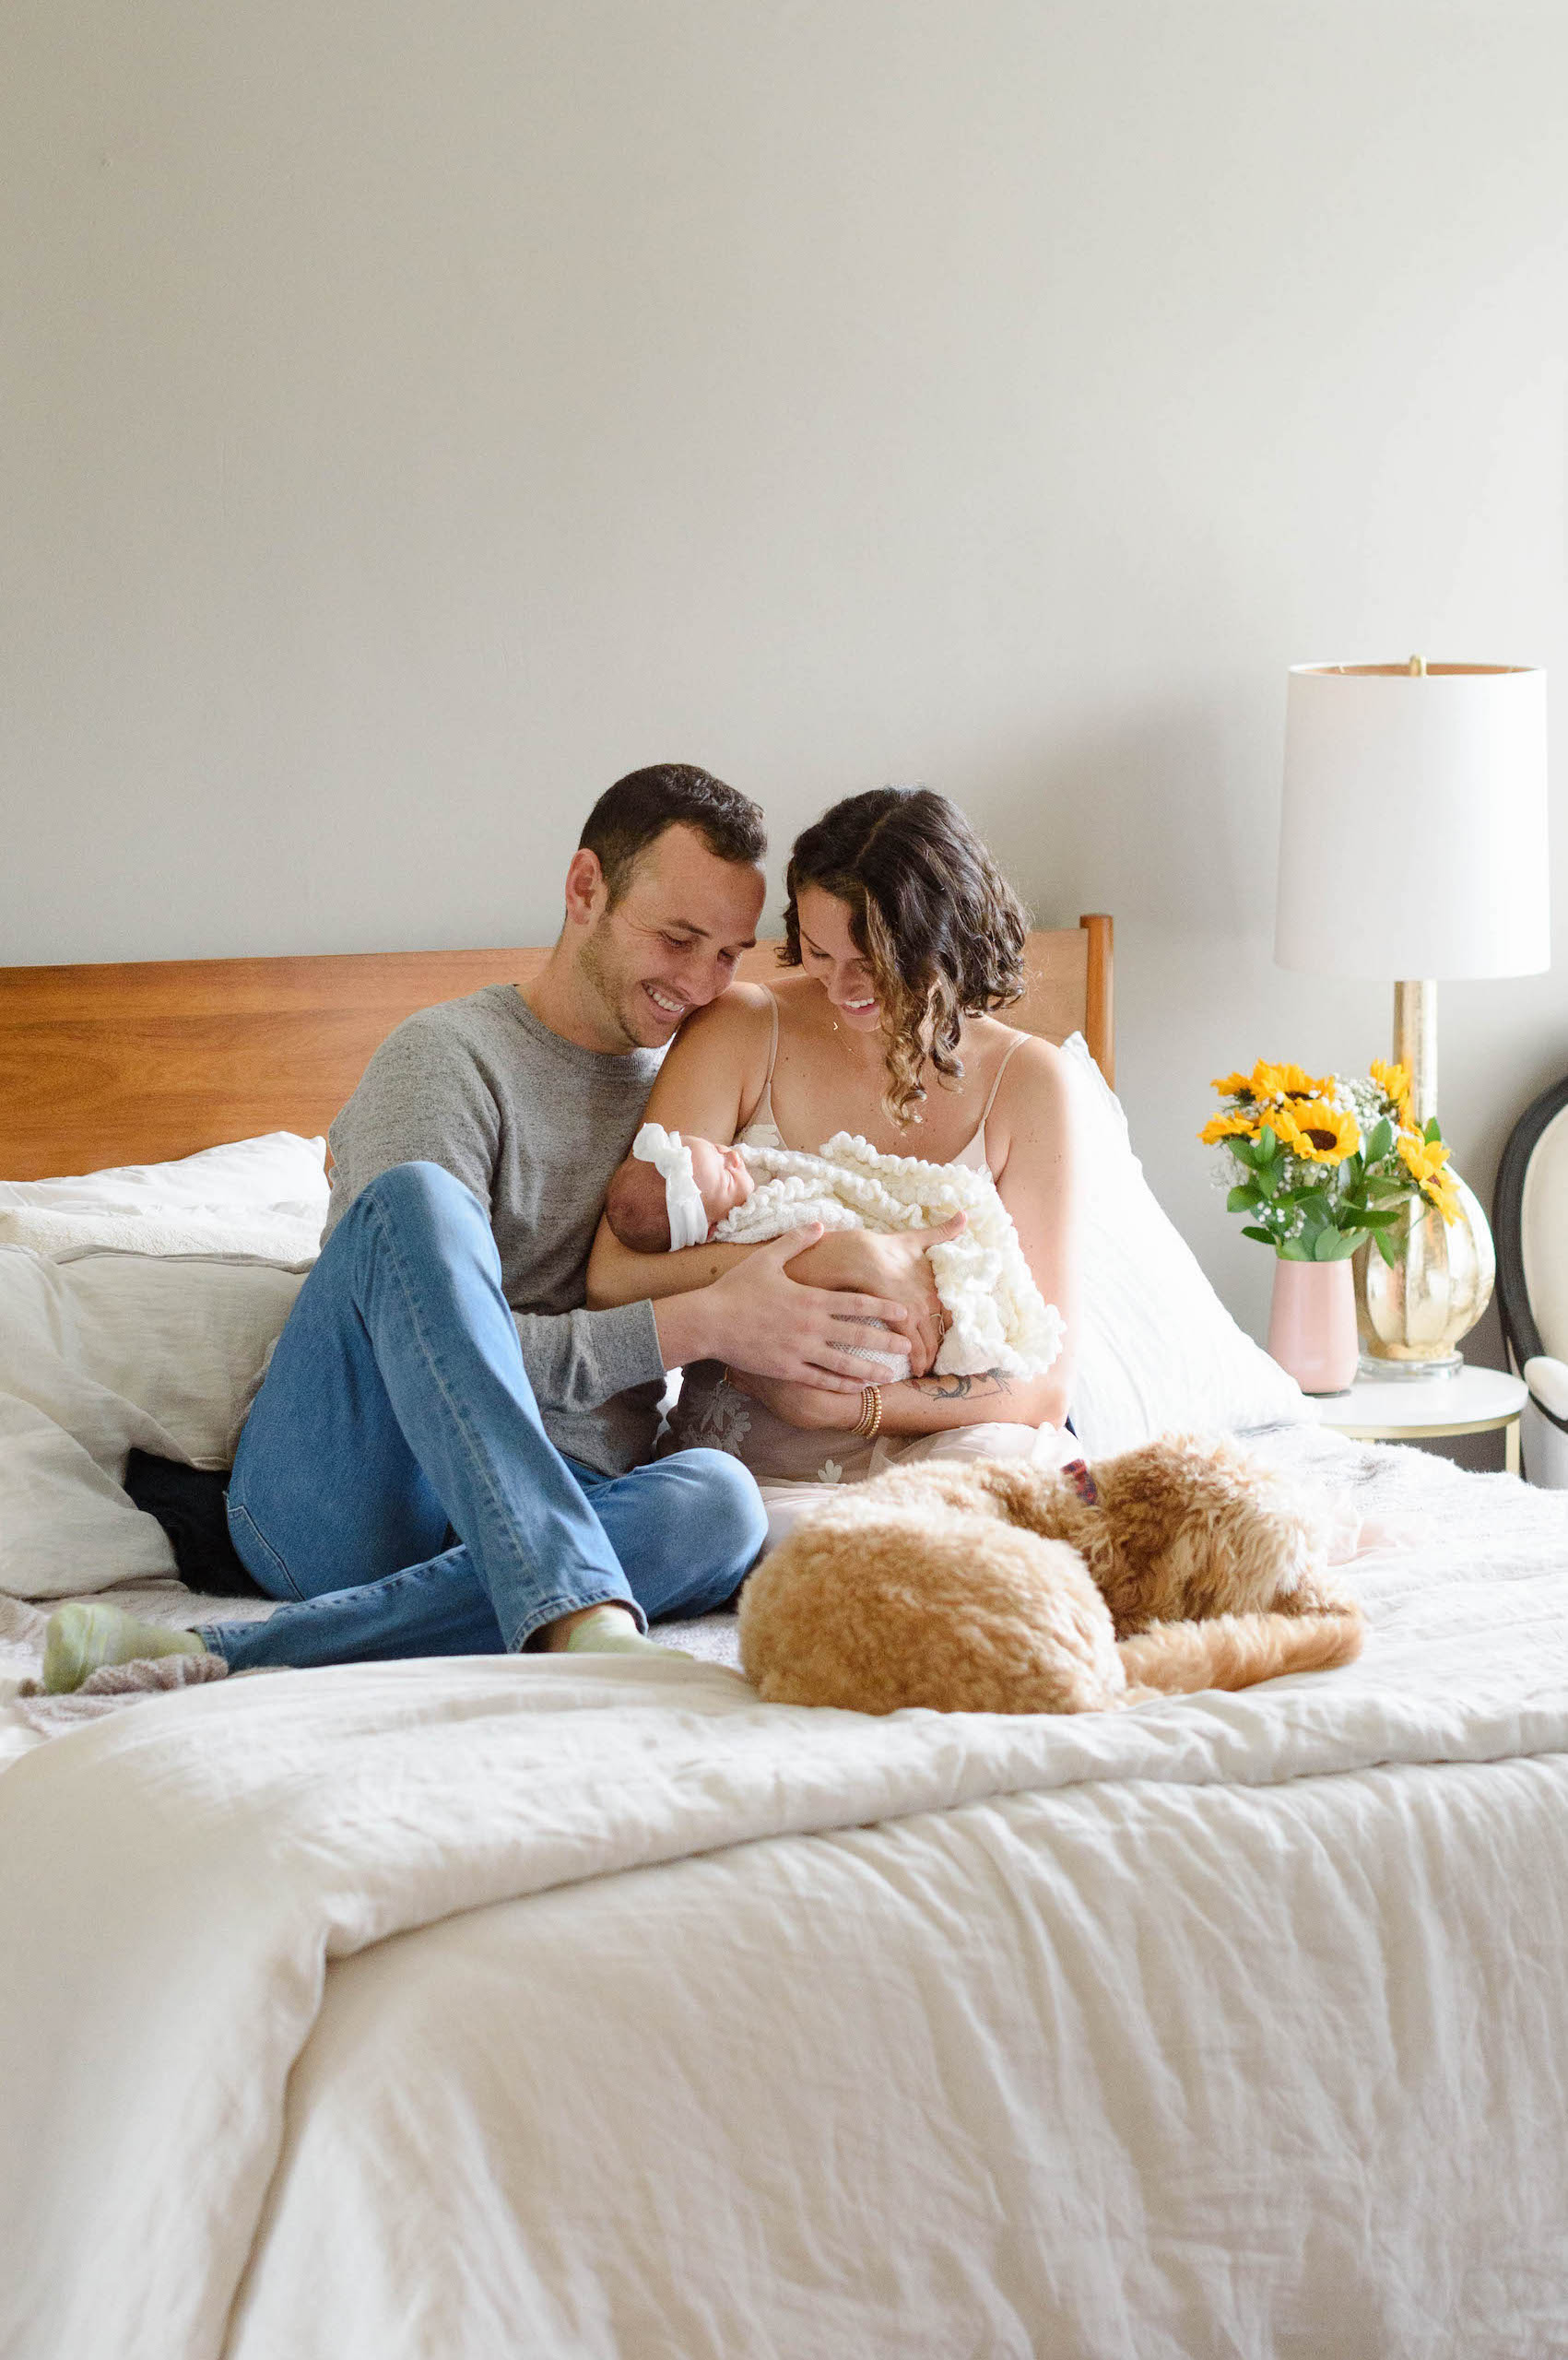 New parents sitting on bed looking at newborn baby with dog at their feet.